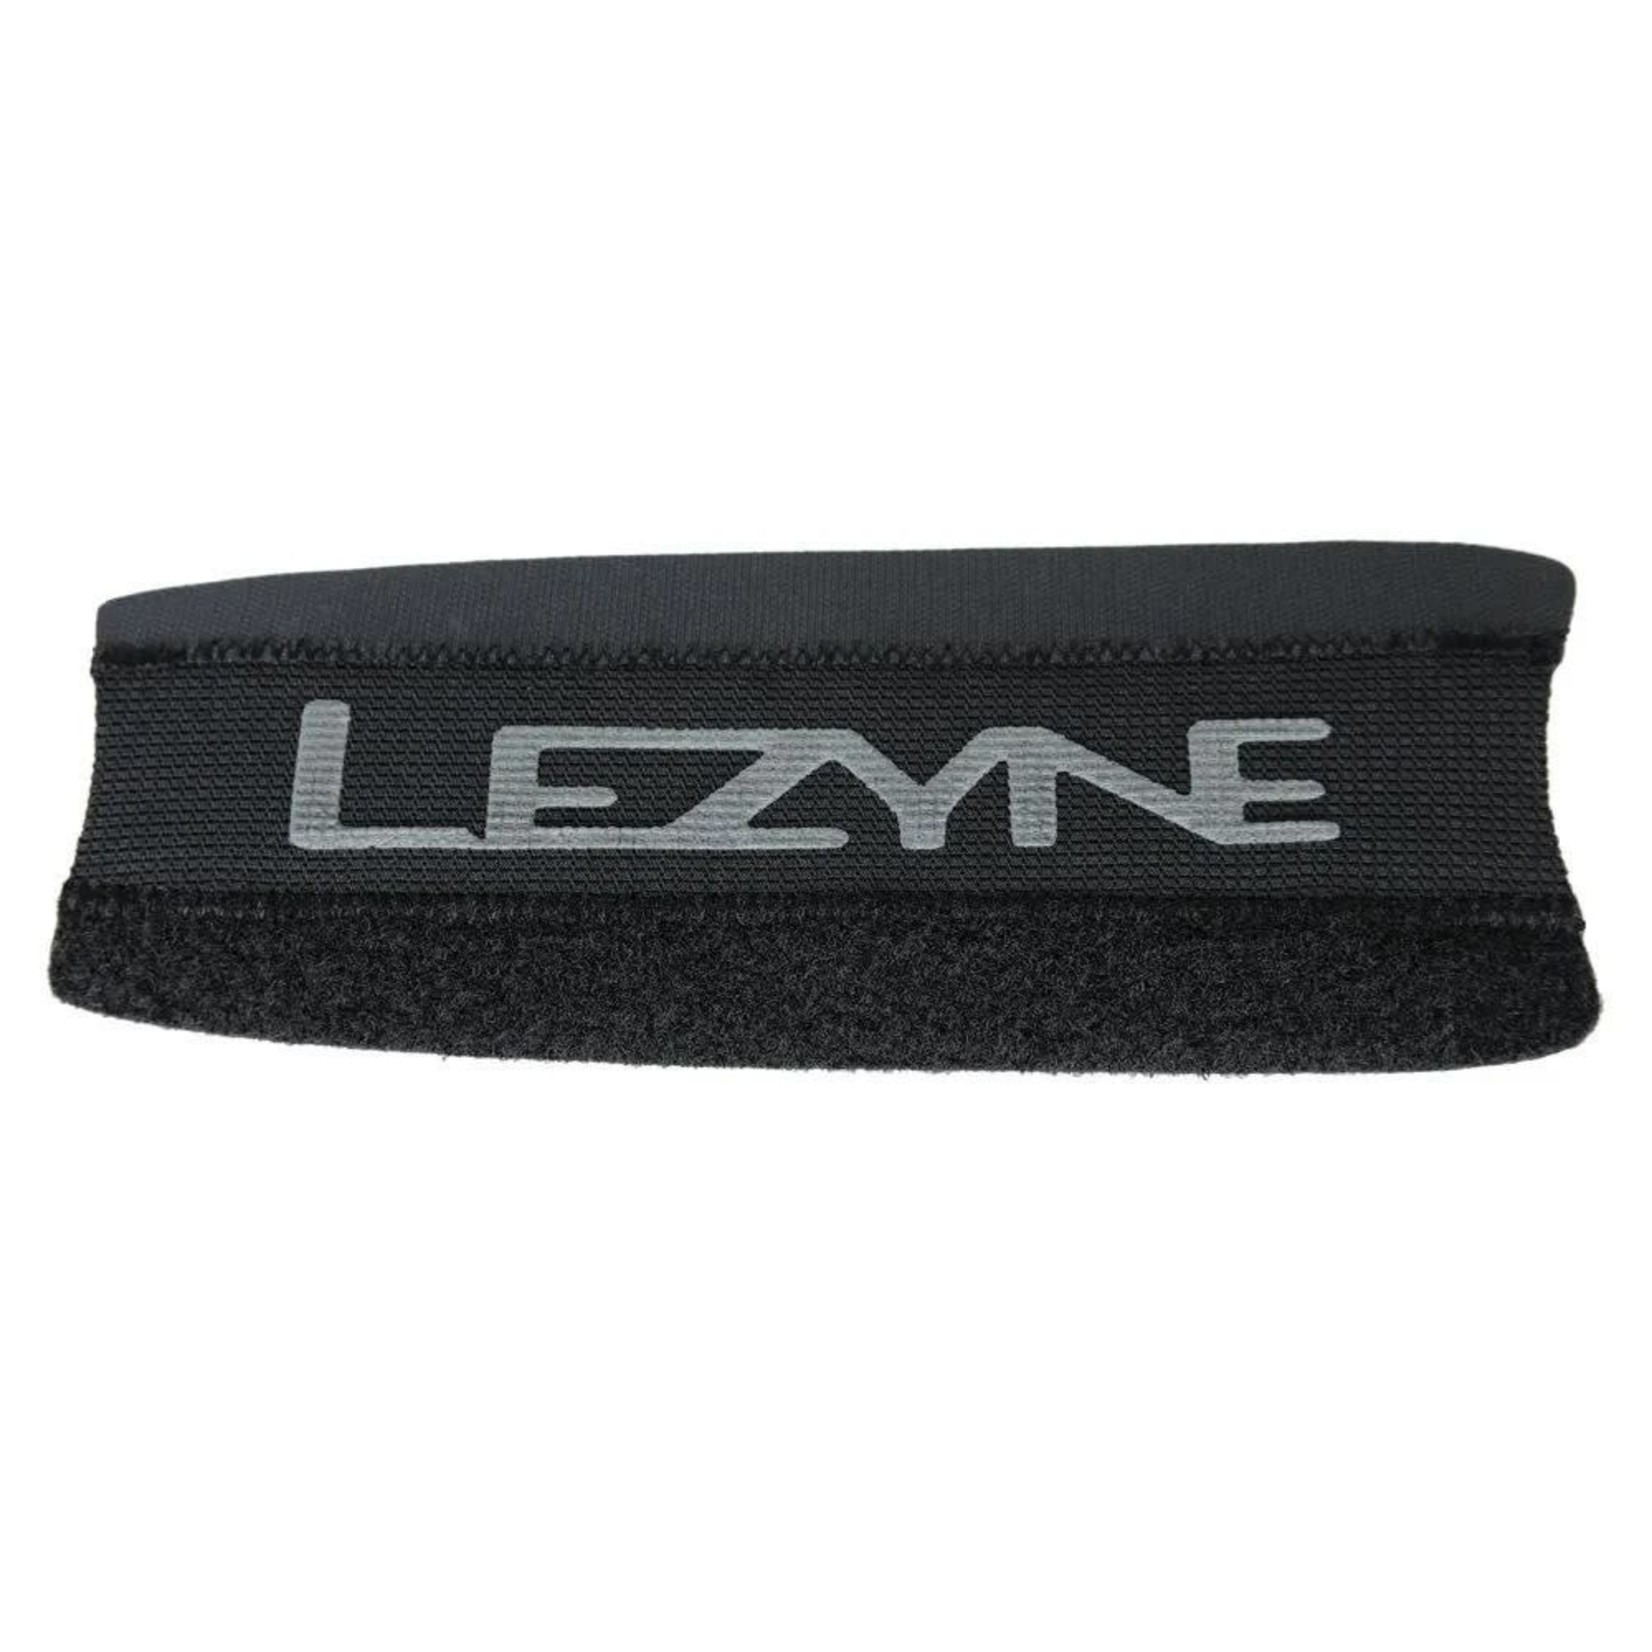 Lezyne Smart Chainstay Protector